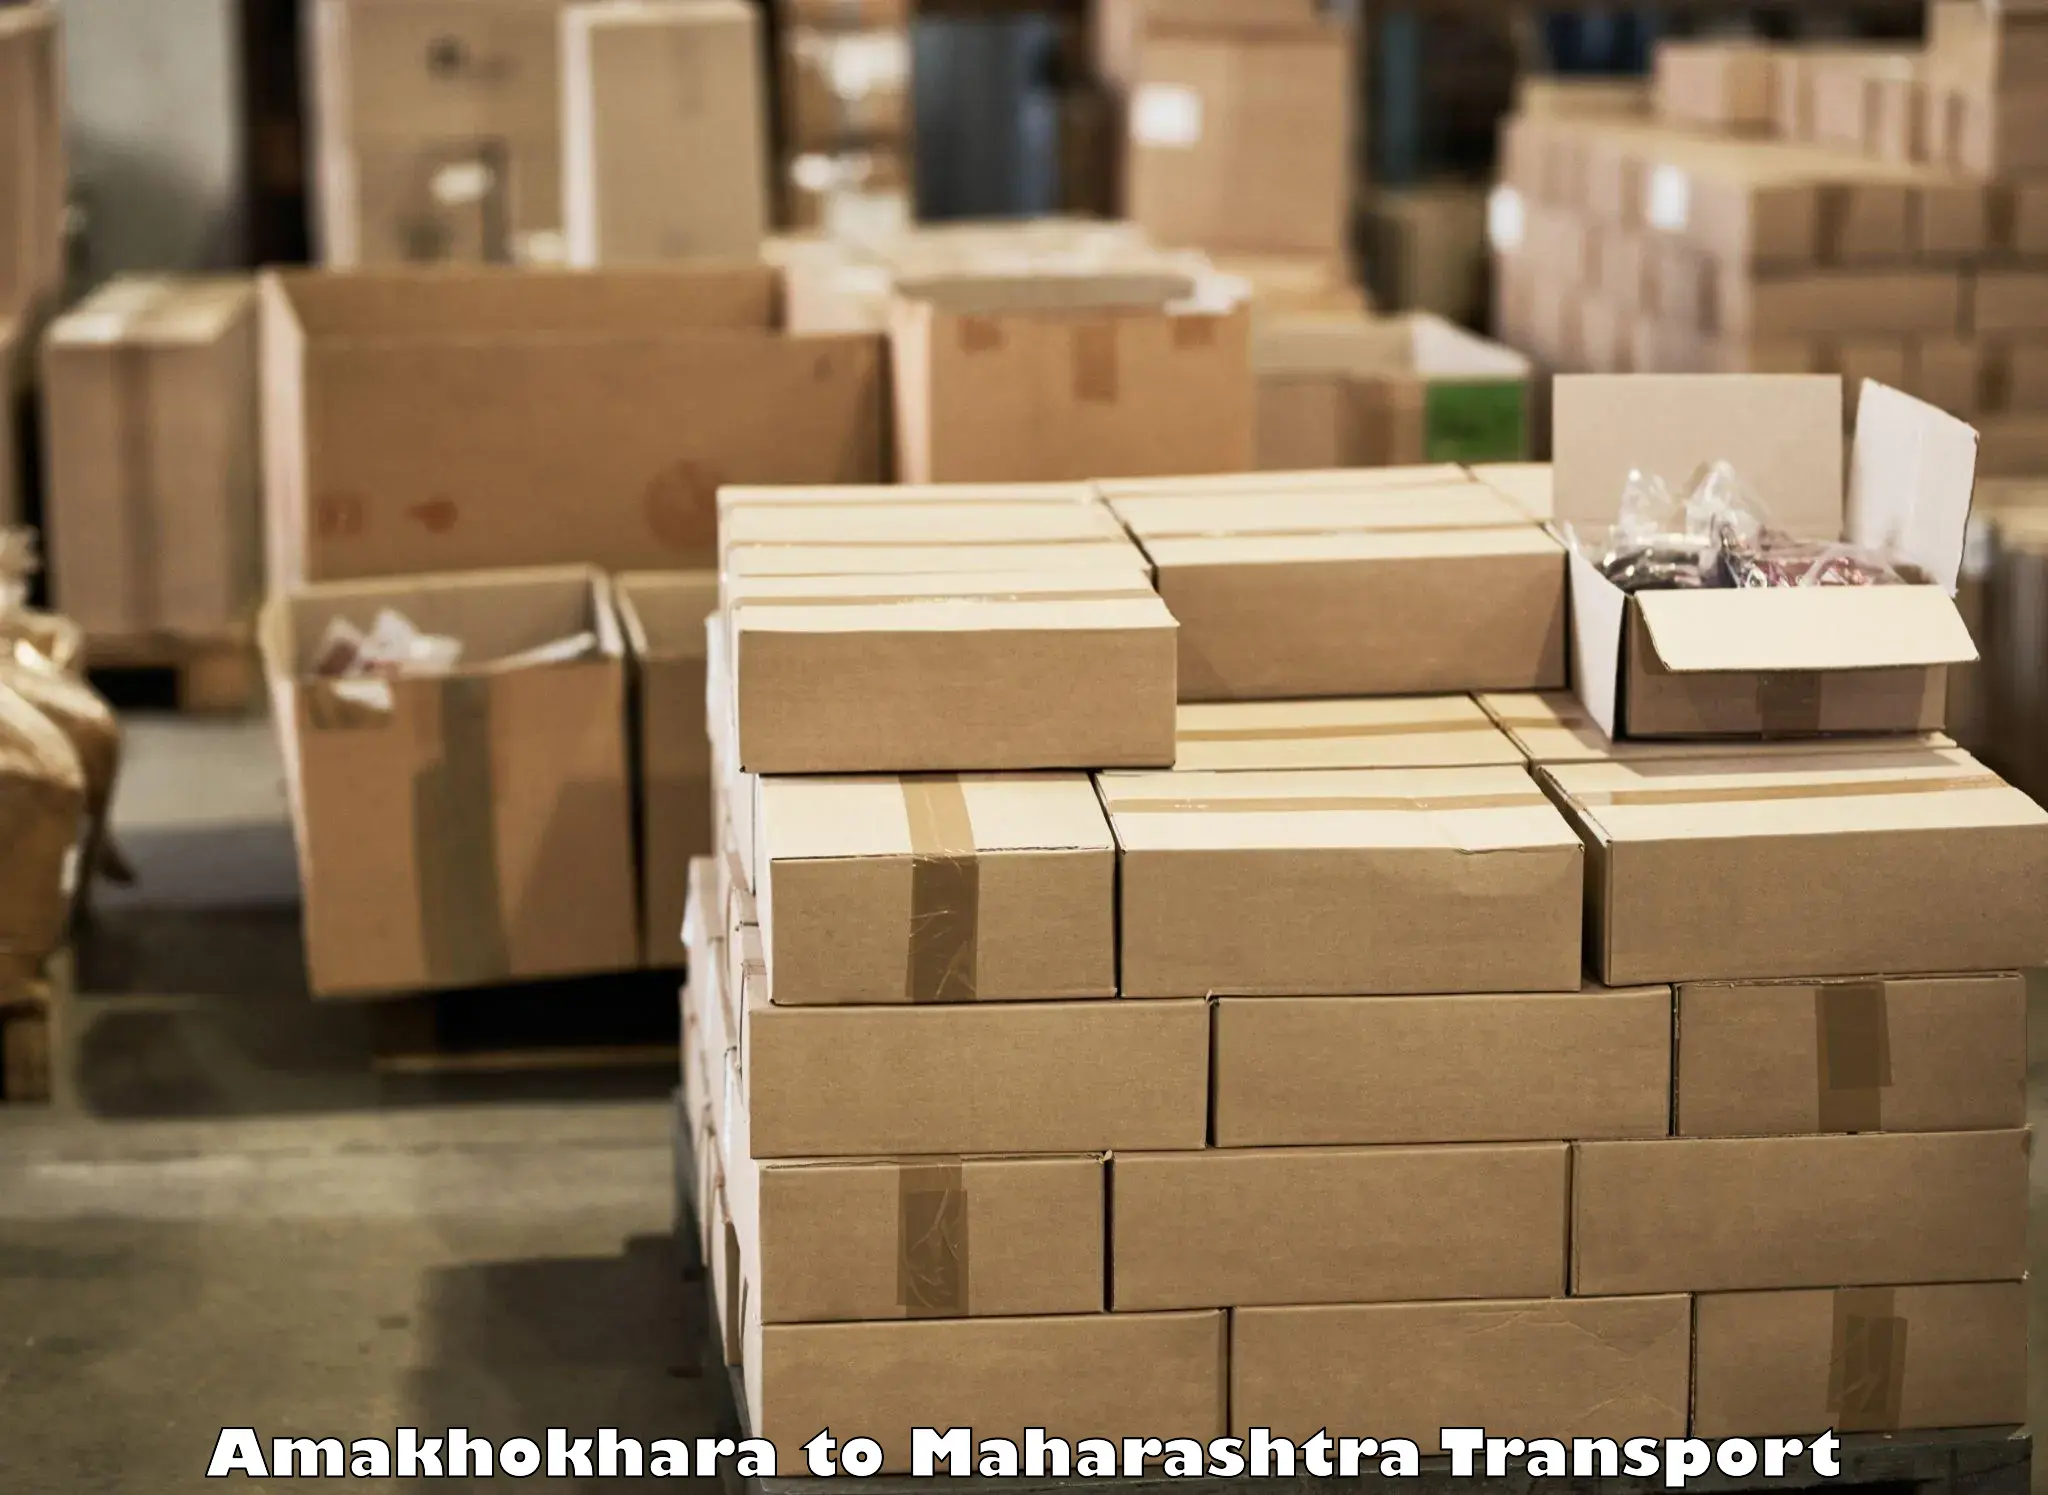 Container transportation services Amakhokhara to Dusarbid